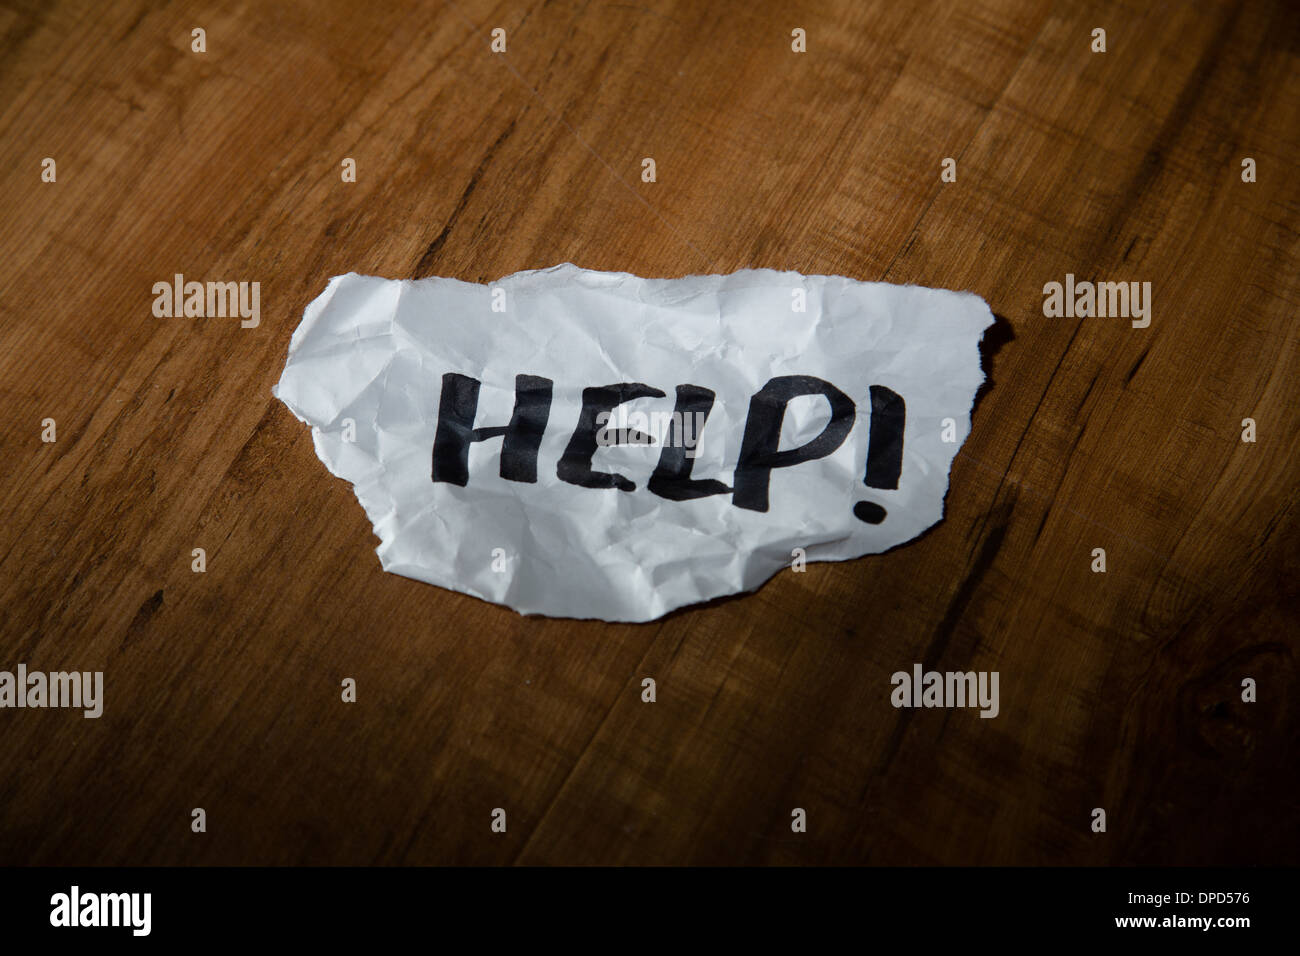 A cry for help - crumpled 'HELP' sign laying on the floor Stock Photo